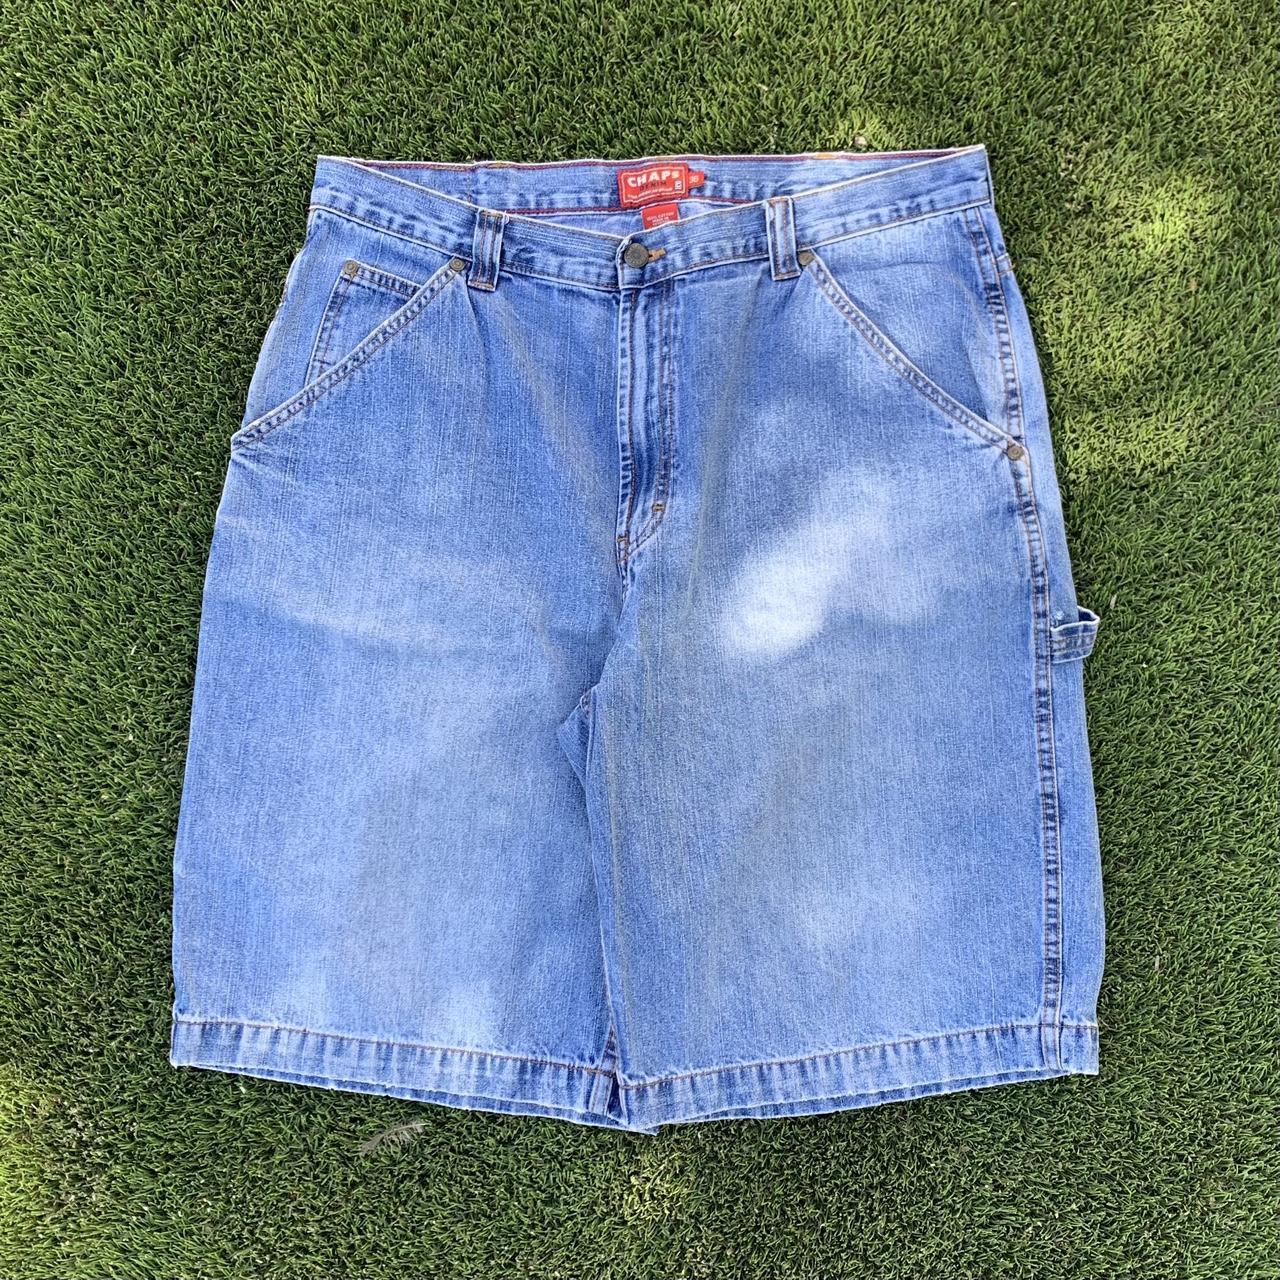 Chaps Men's Blue and Navy Shorts | Depop